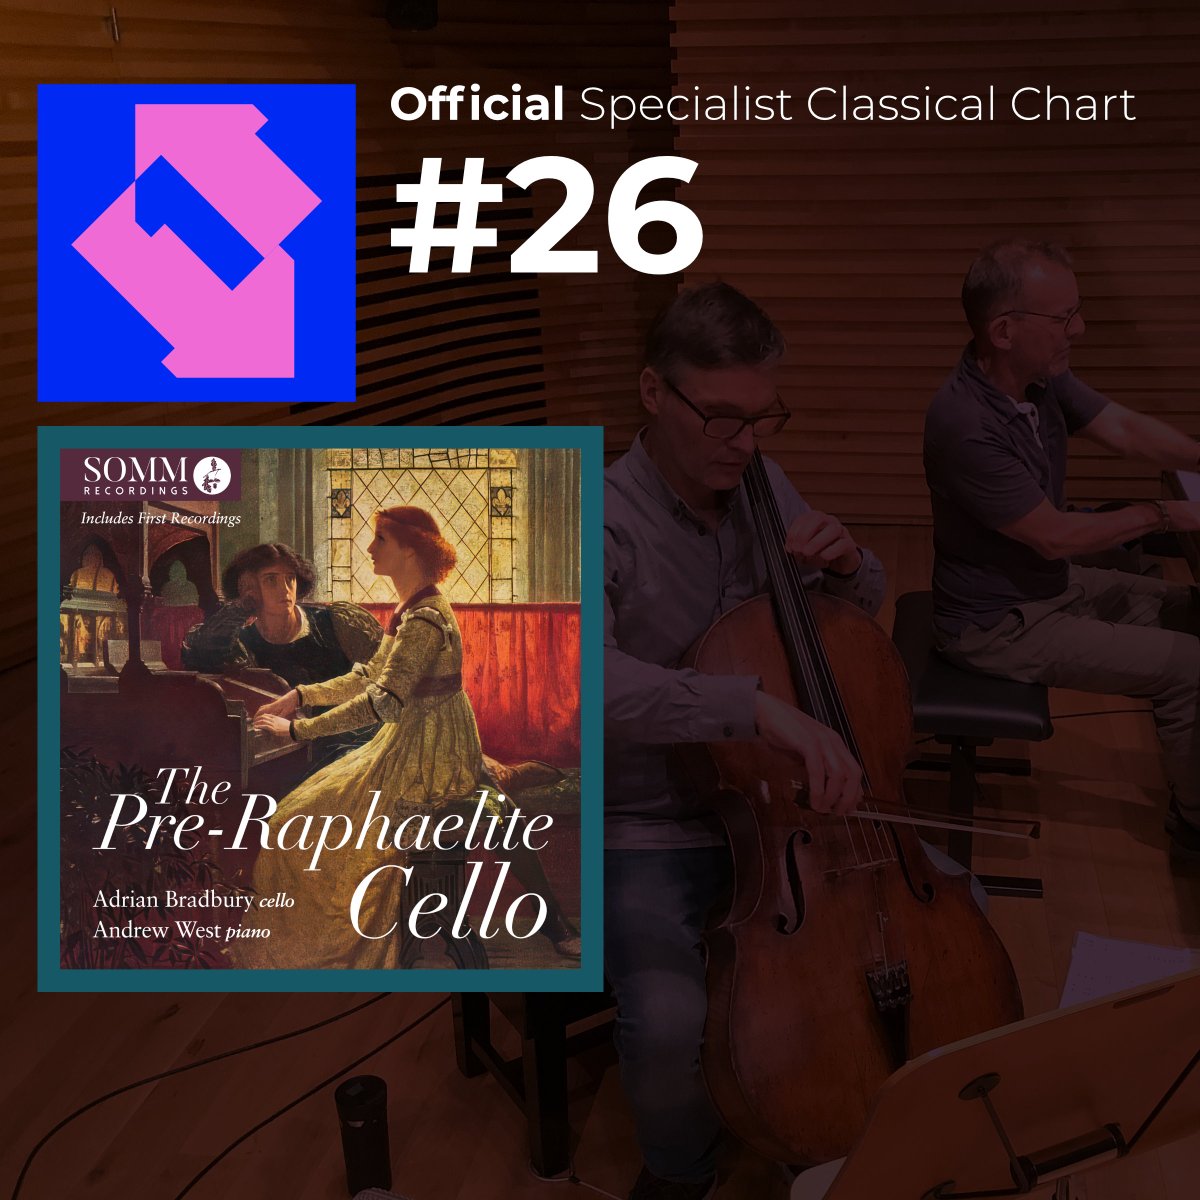 Congratulations to Adrian Bradbury and Andrew West! Their release, The Pre-Raphaelite Cello made its debut in the Official Specialist Classical Chart on Friday! Make sure you've added it to your library via listn.fm/preraphaelitec…